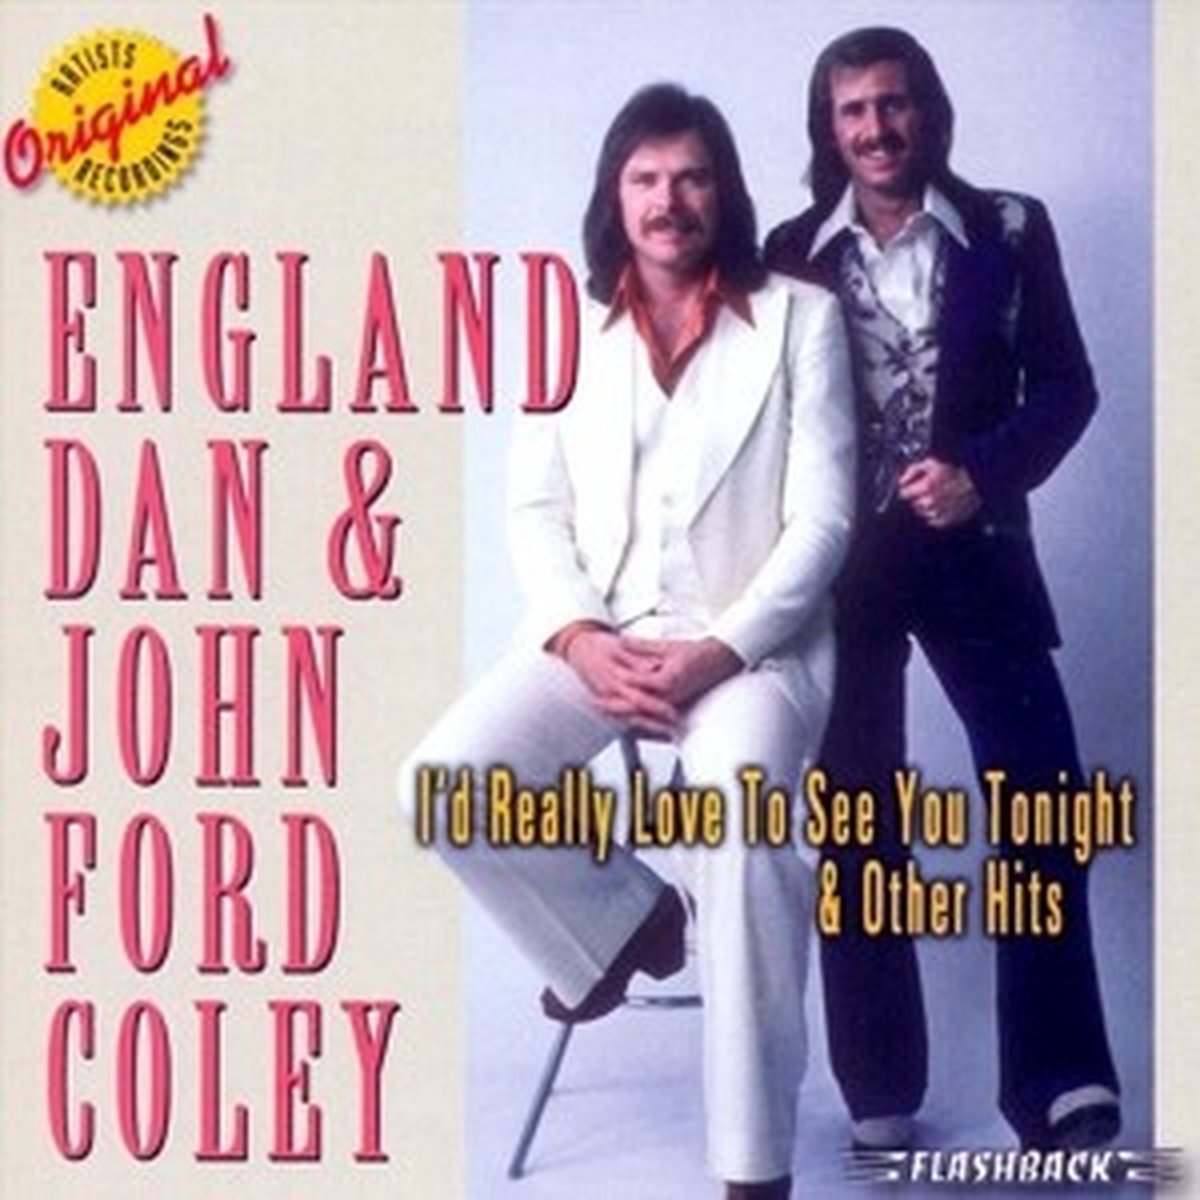 England Dan & John Ford Coley - I'd Really Love To See You Tonight And Other Hits (CD) - England Dan & John Ford Coley